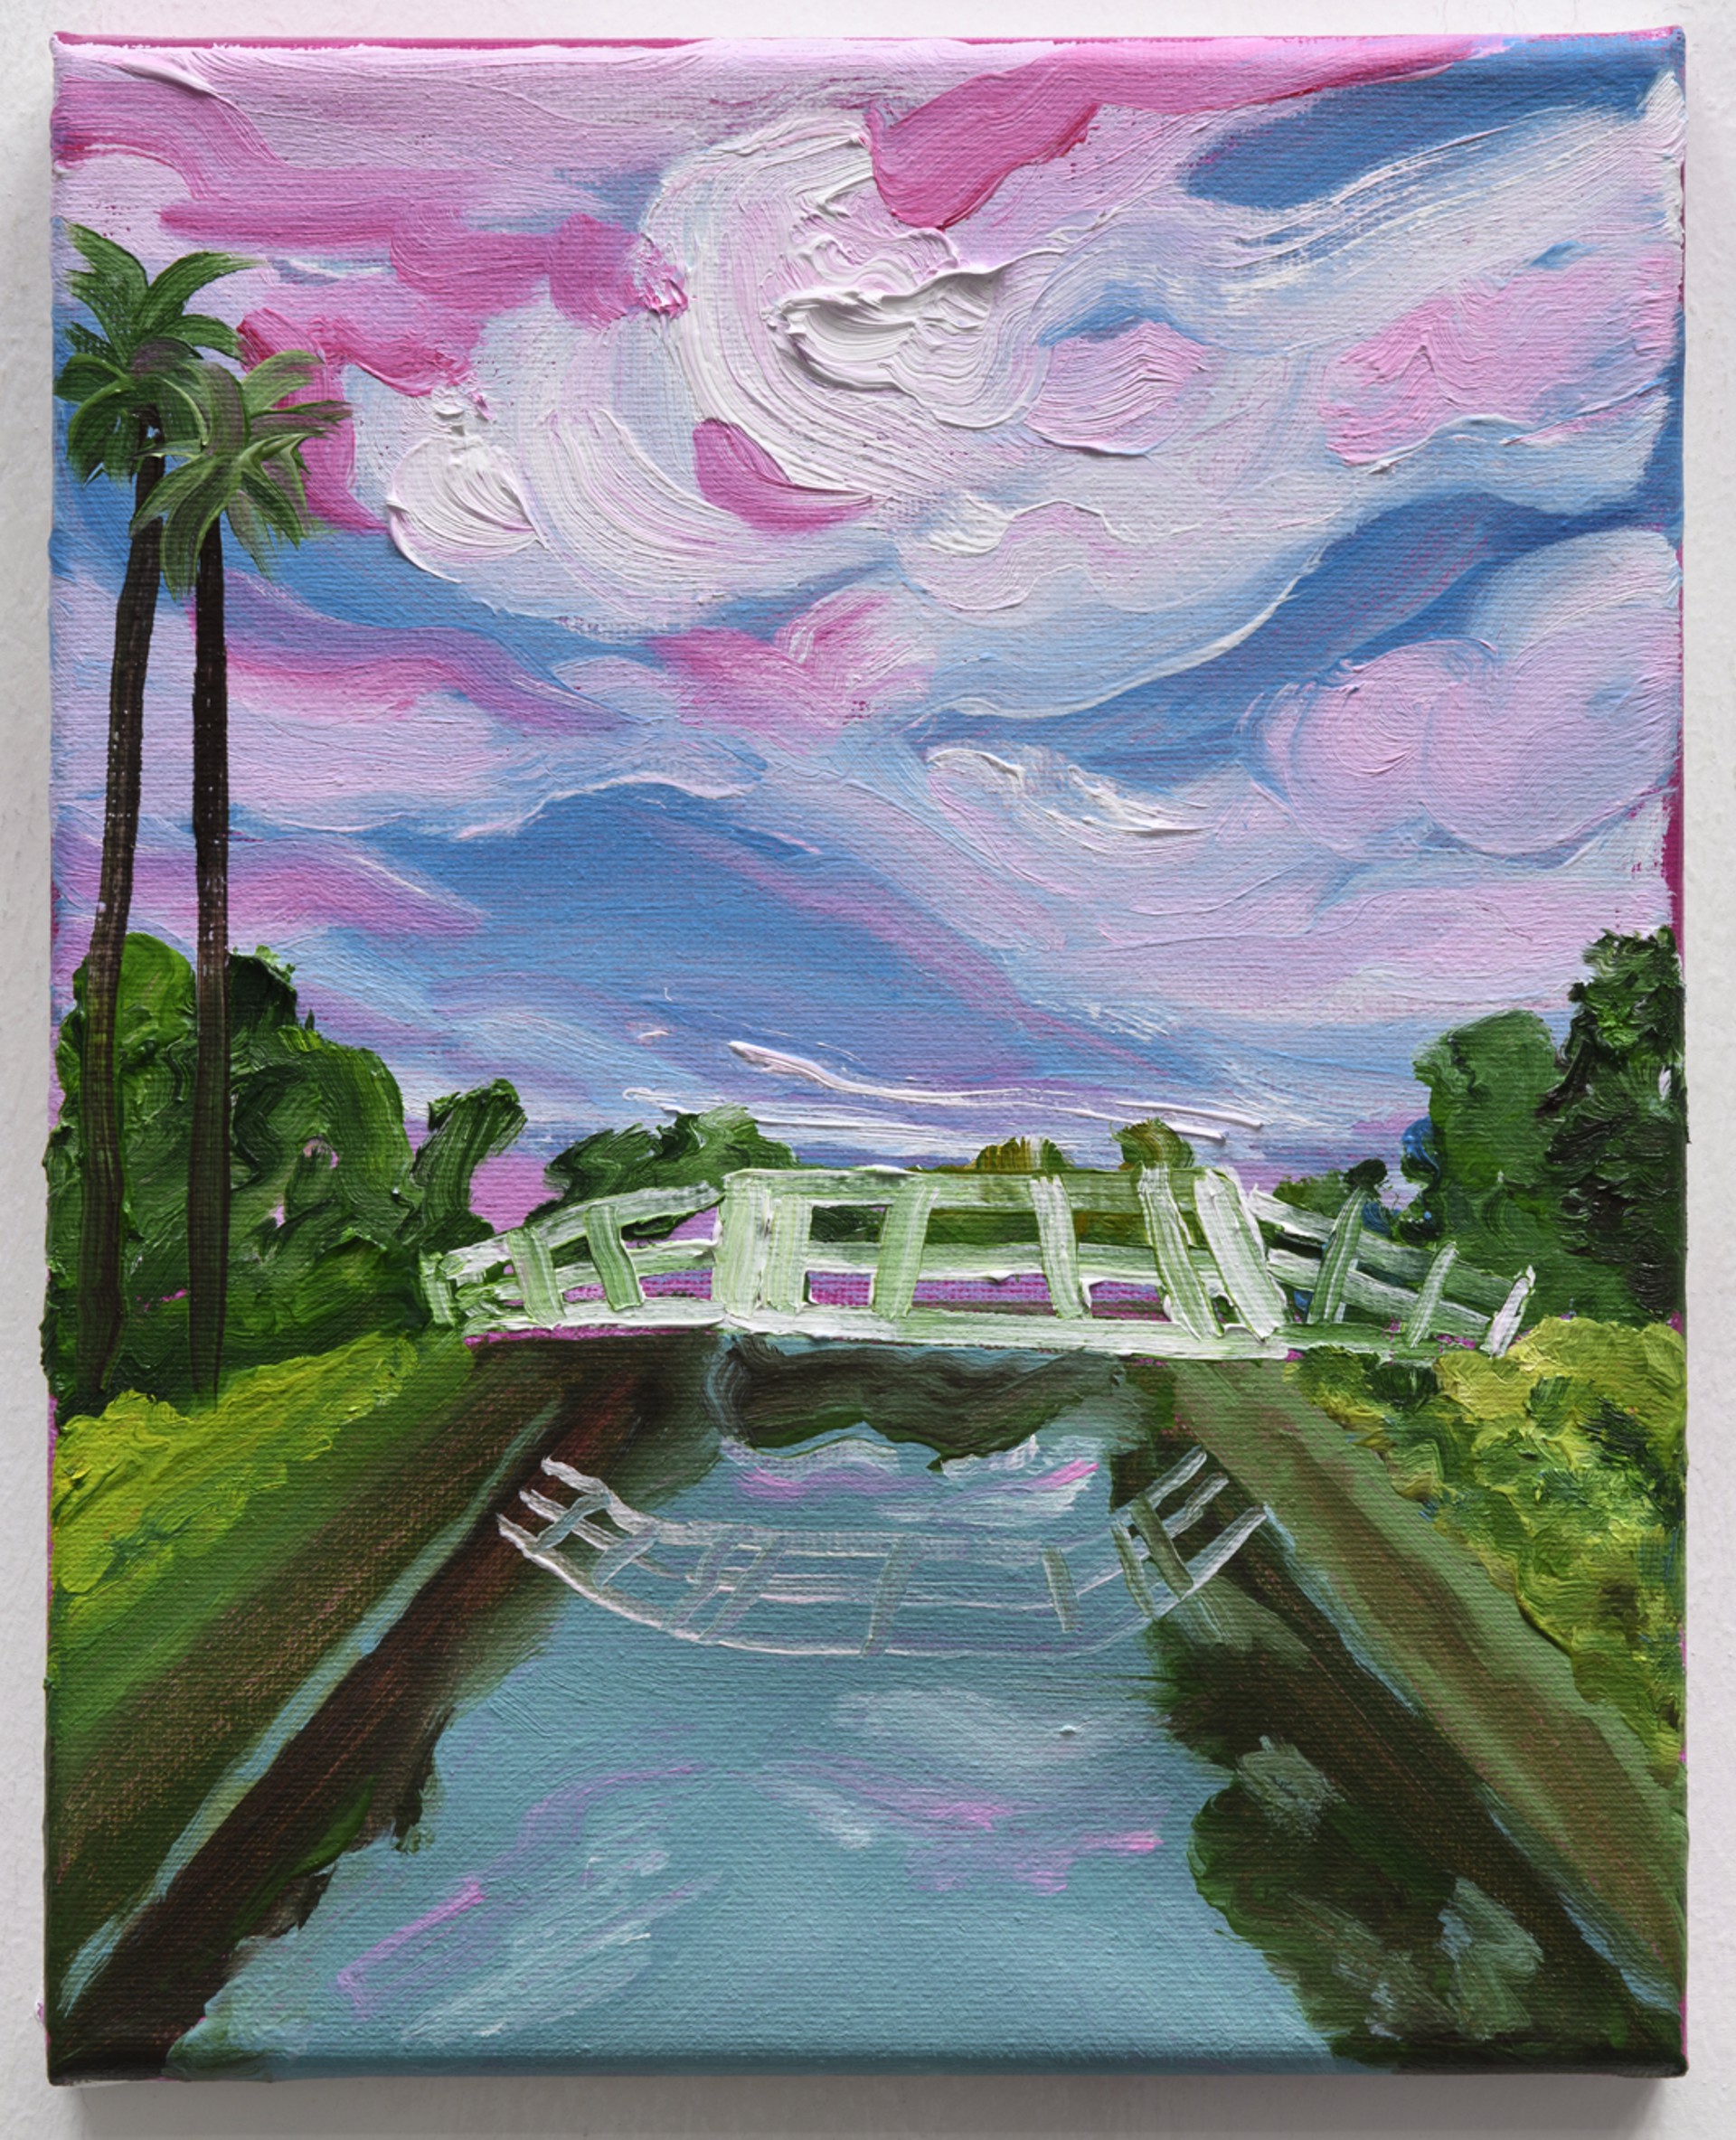 Venice Canal With Bubblegum Pink Clouds by Susan Lizotte